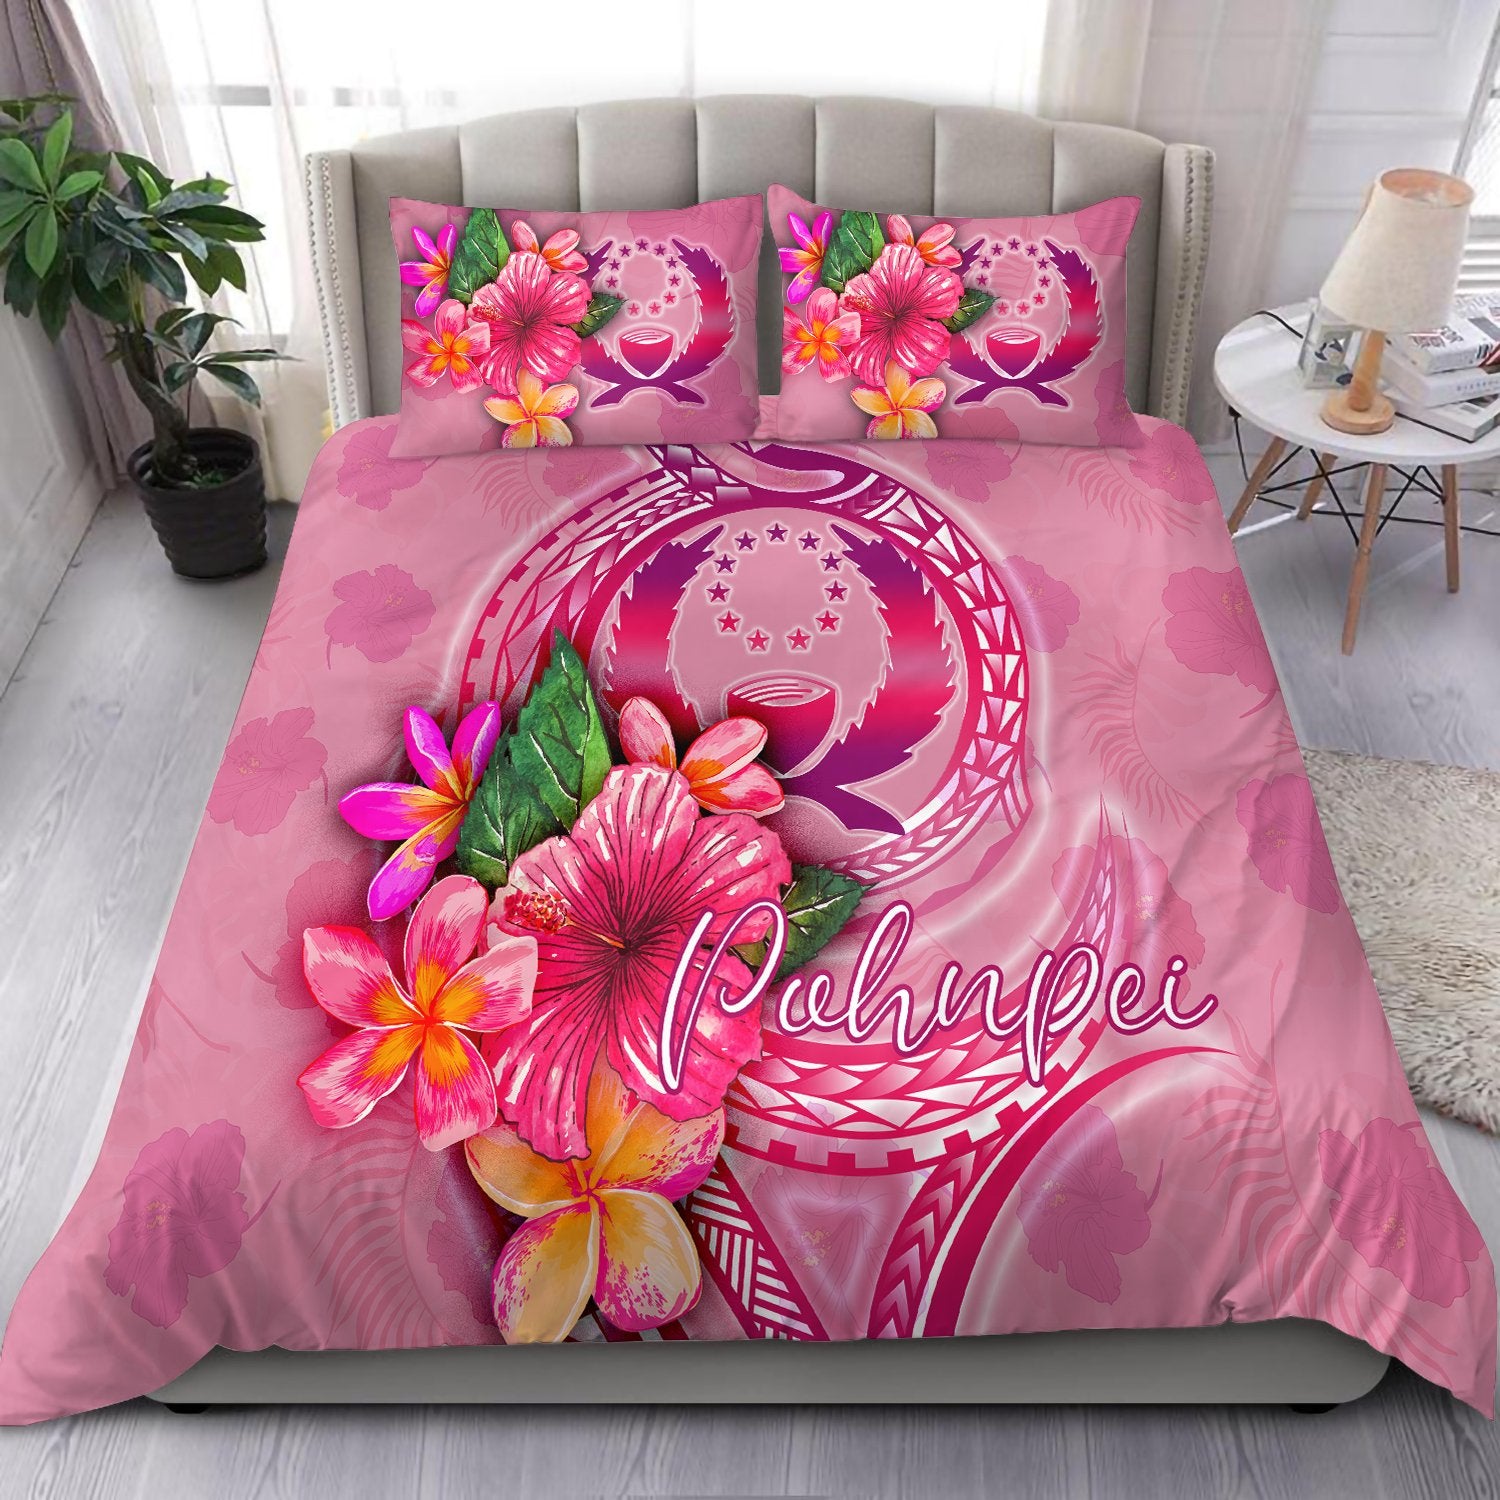 Pohnpei Polynesian Bedding Set - Floral With Seal Pink pink - Polynesian Pride